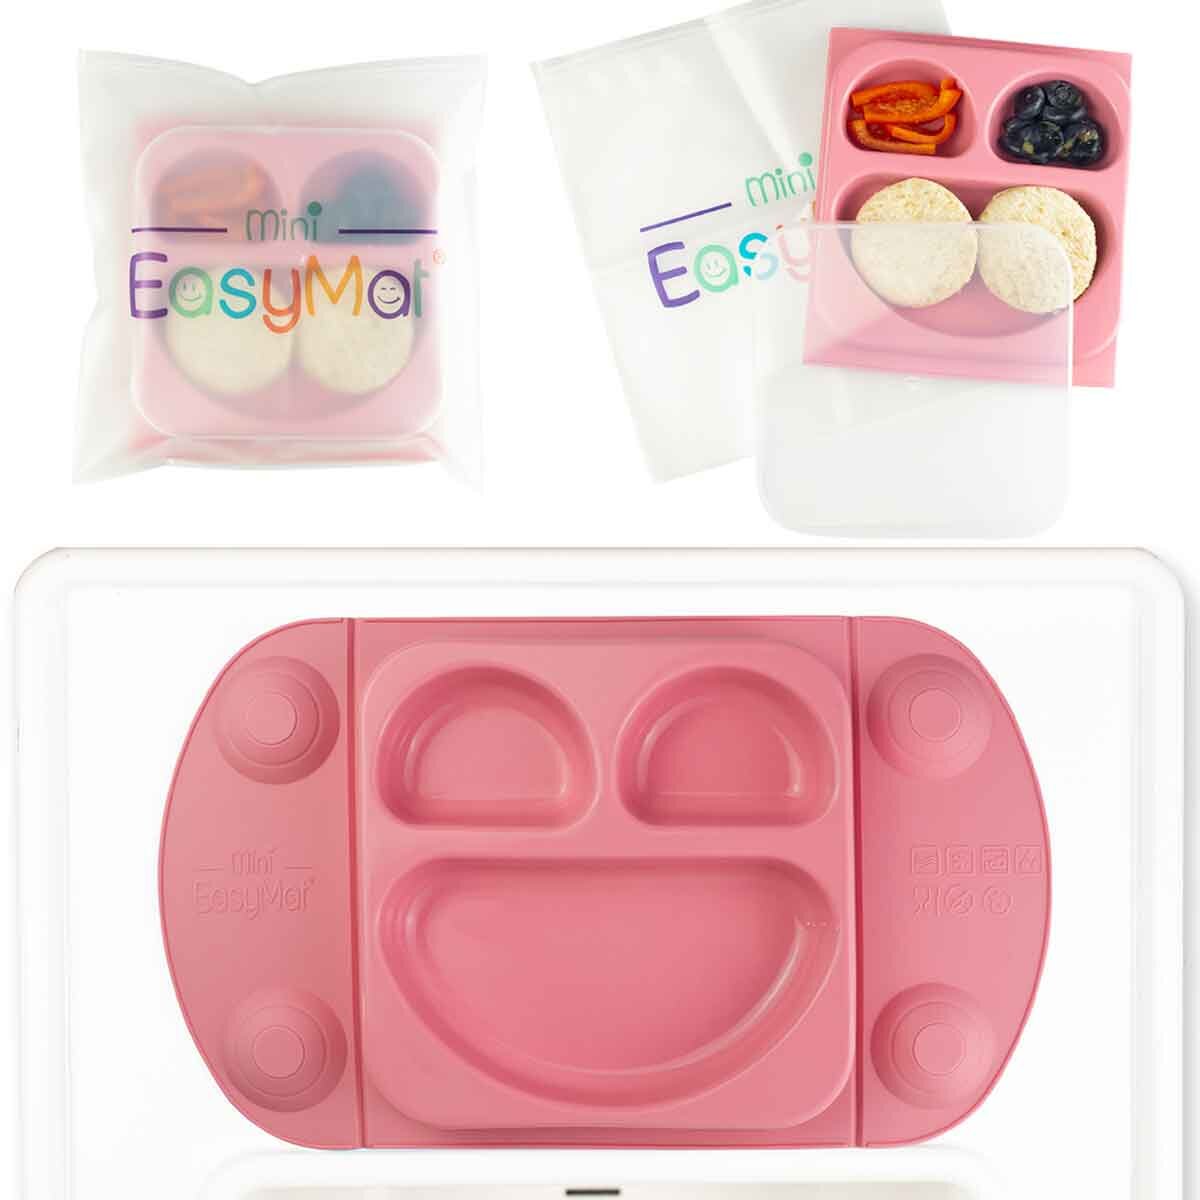 EasyTots EasyMat Mini Divided Suction Weaning Plate in 6 Colours